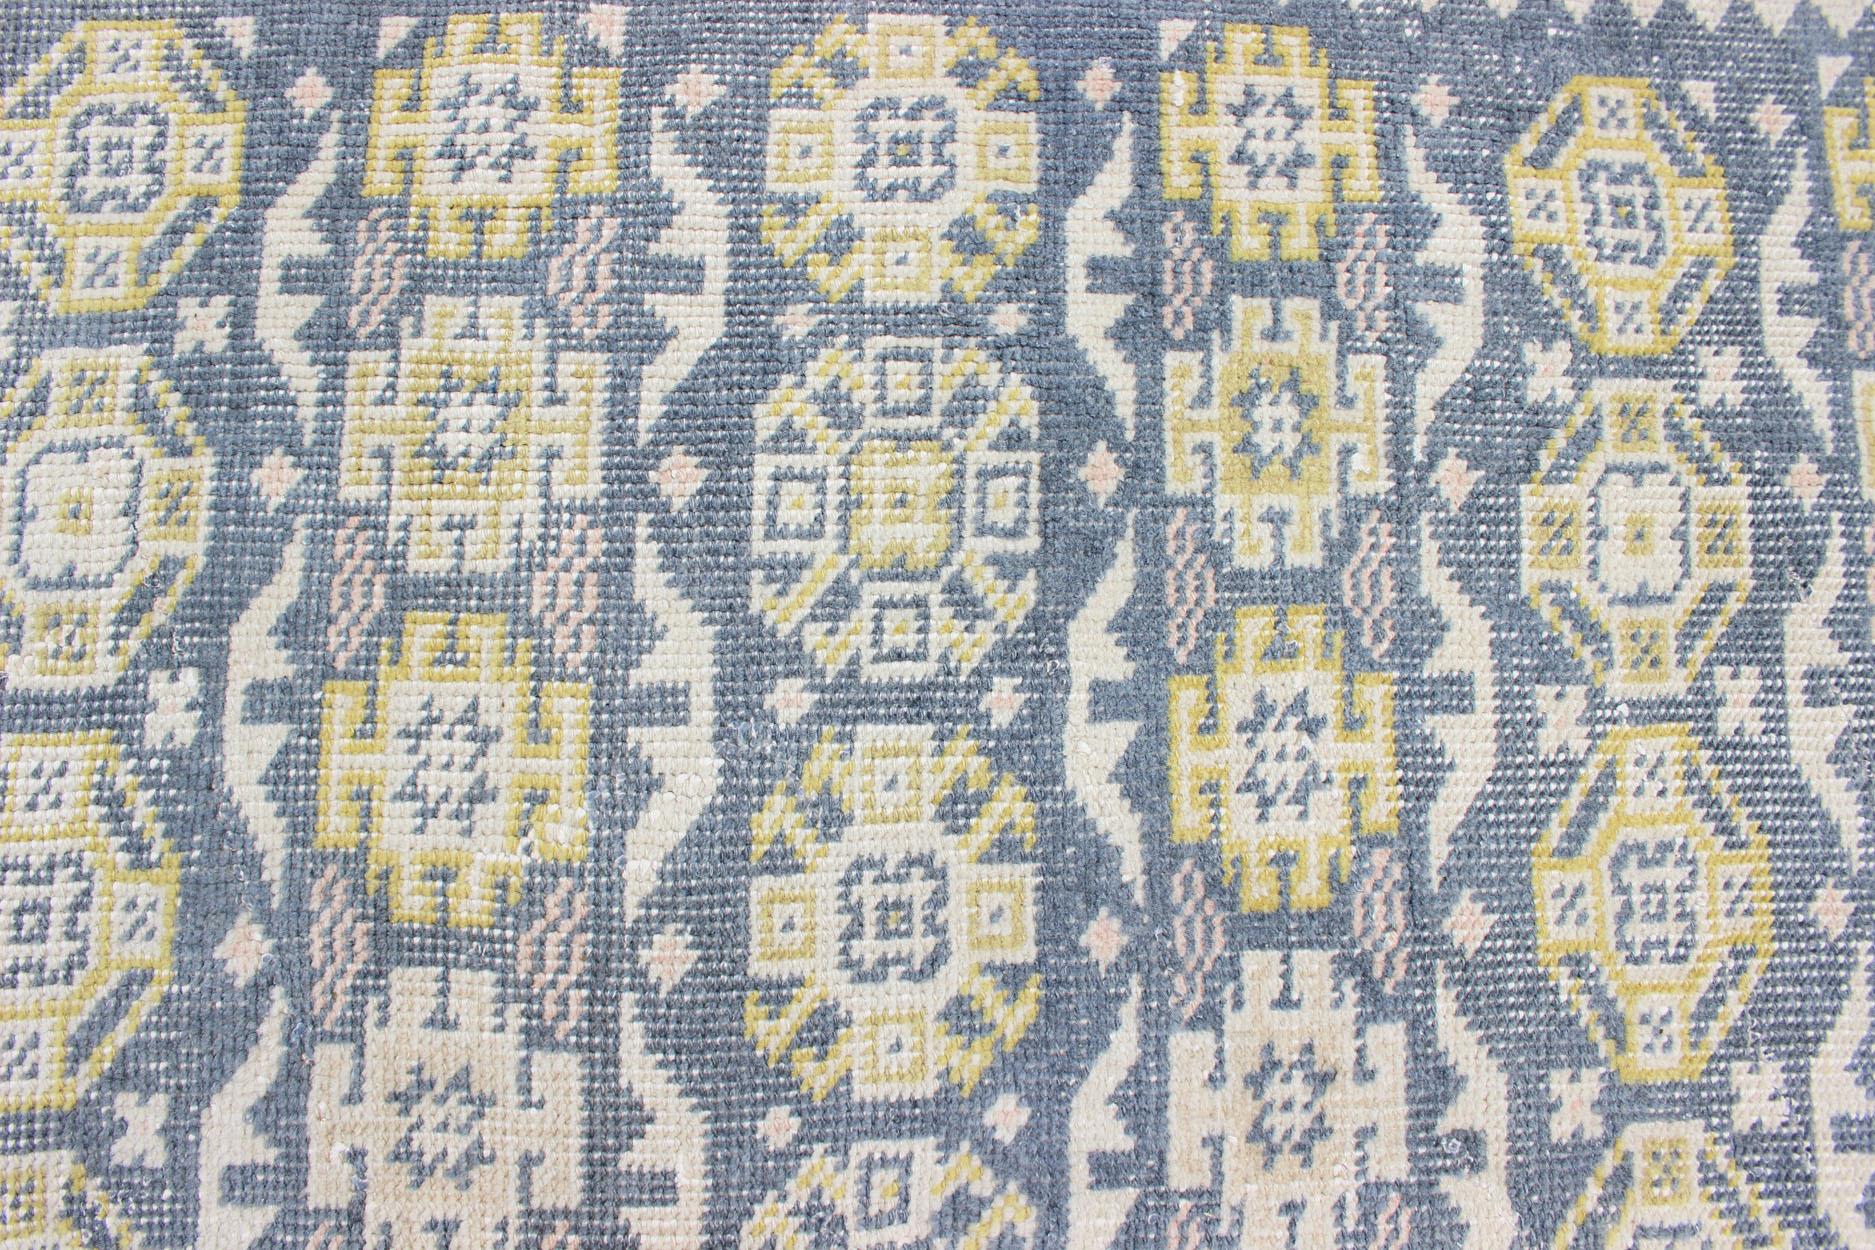 Antique Khotan Rug in Shades of Blue with Gray, L. Pink and Yellow Accents For Sale 1